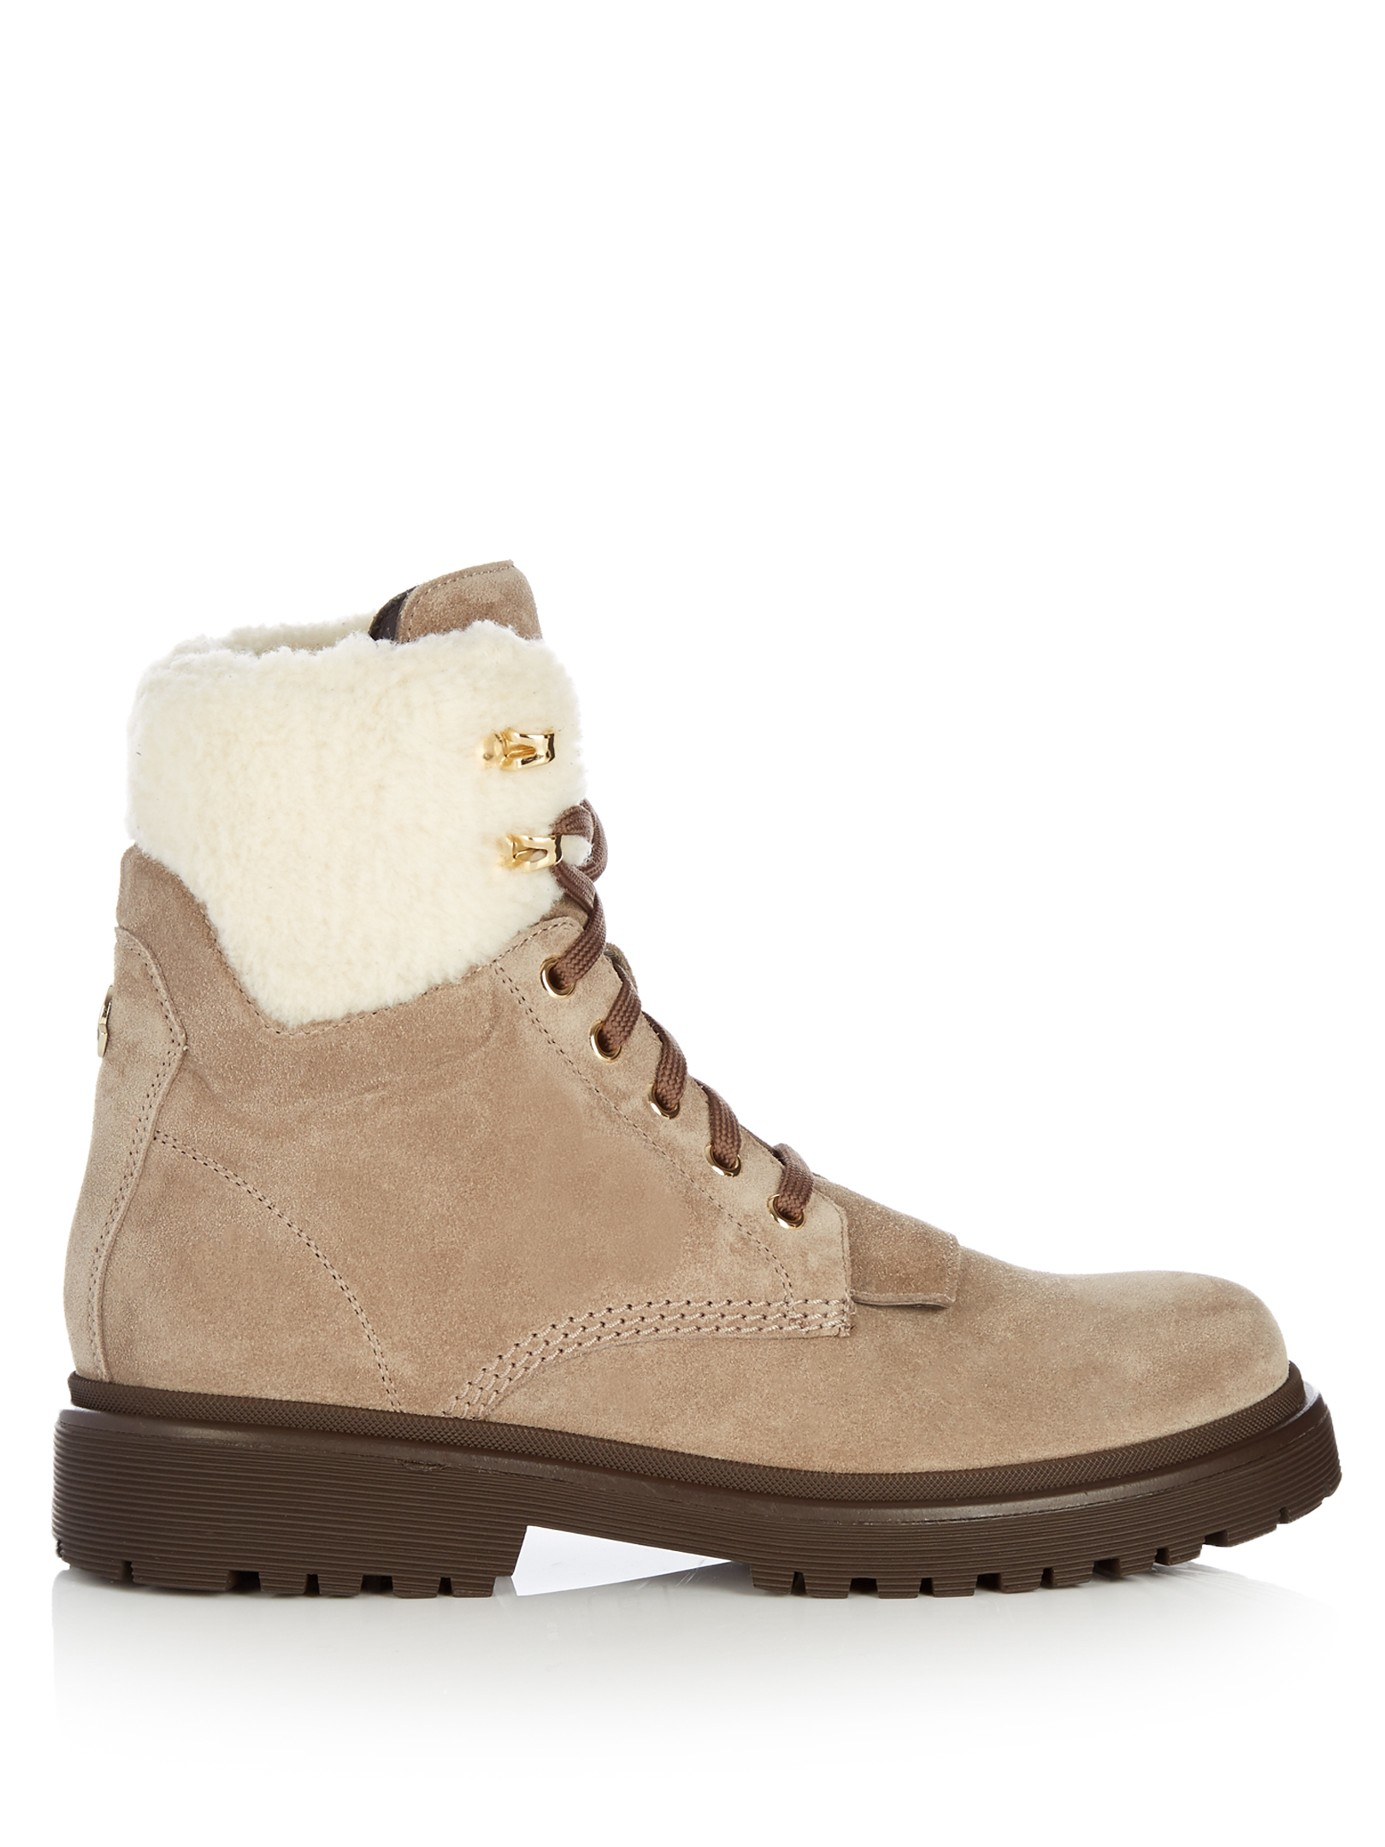 Moncler Suede Patty Shearling Hiker Boot in Beige (Gray) - Lyst